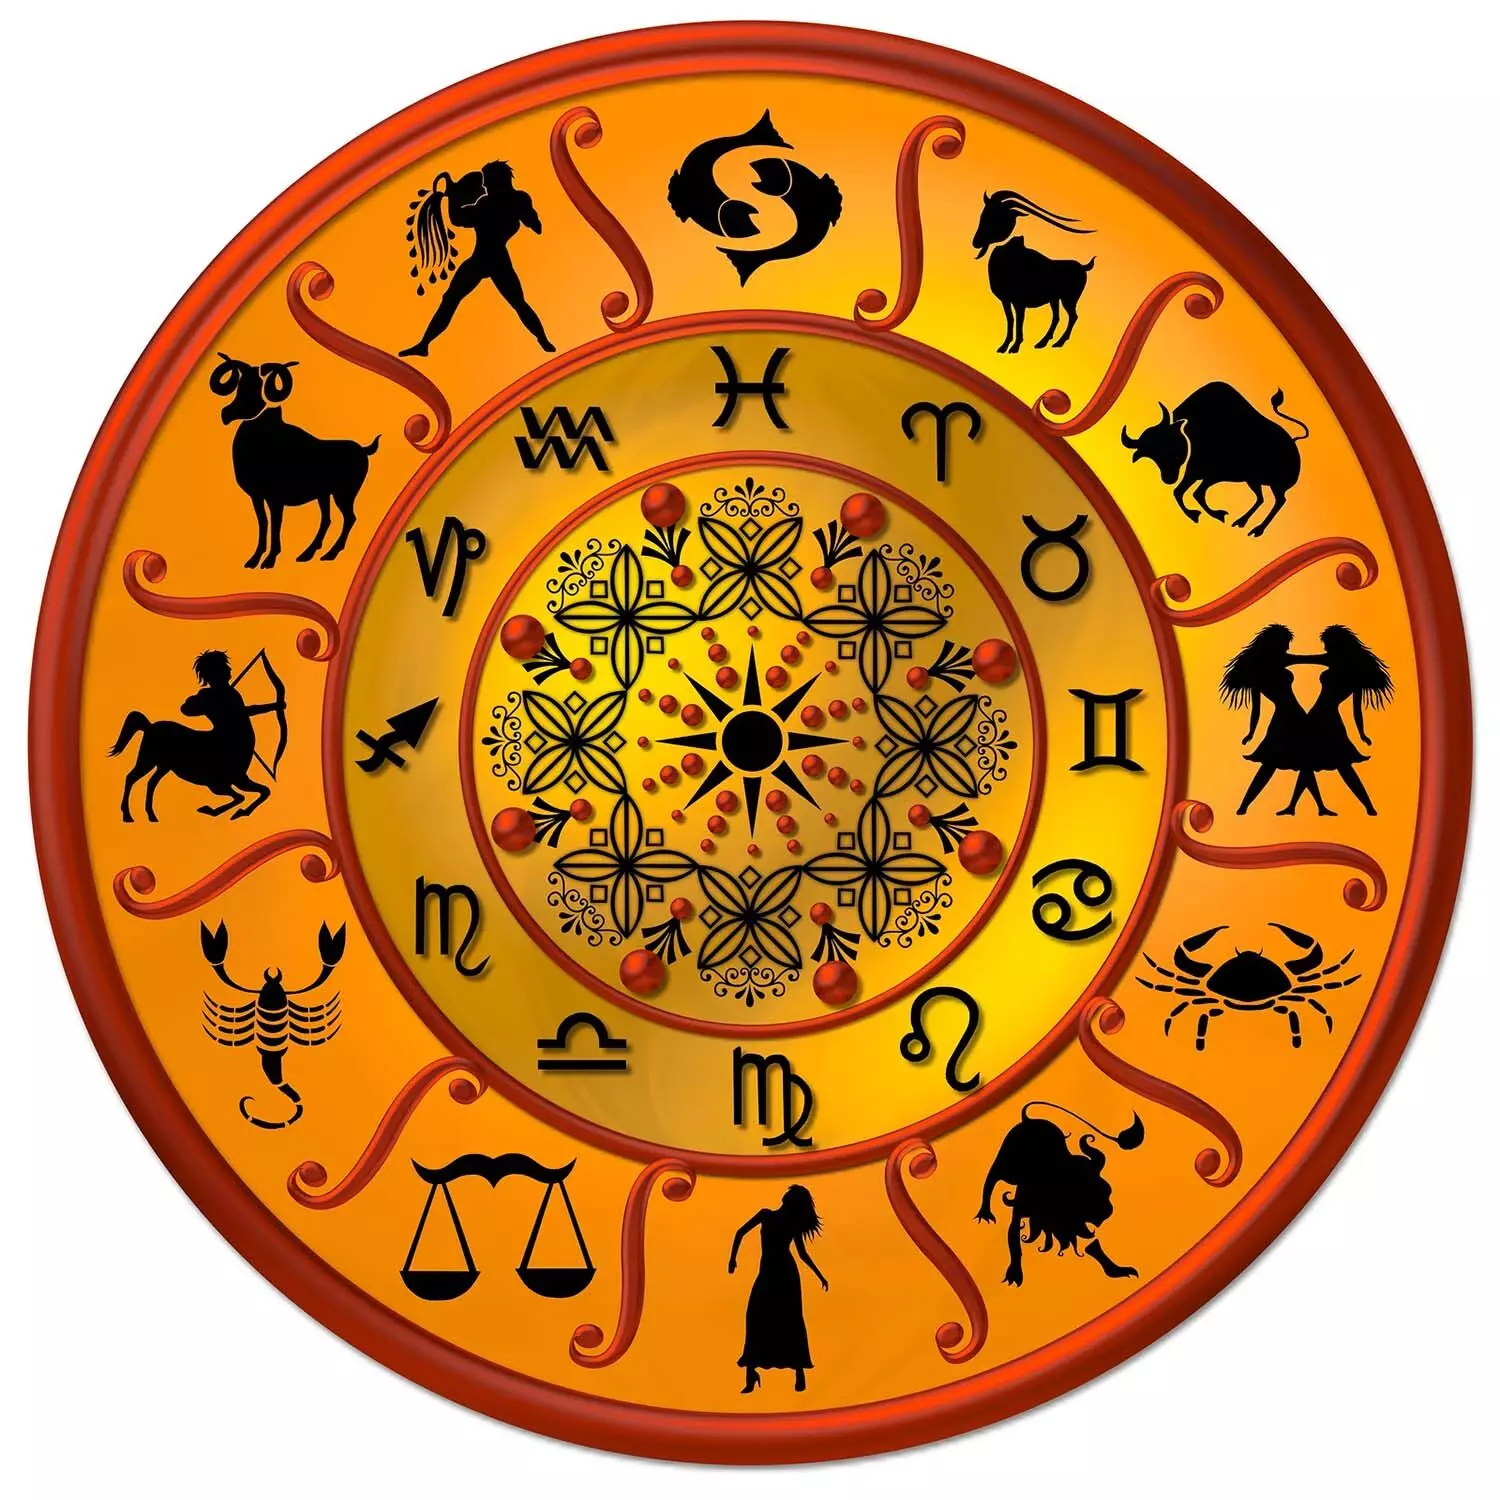 05 August  – Know your todays horoscope